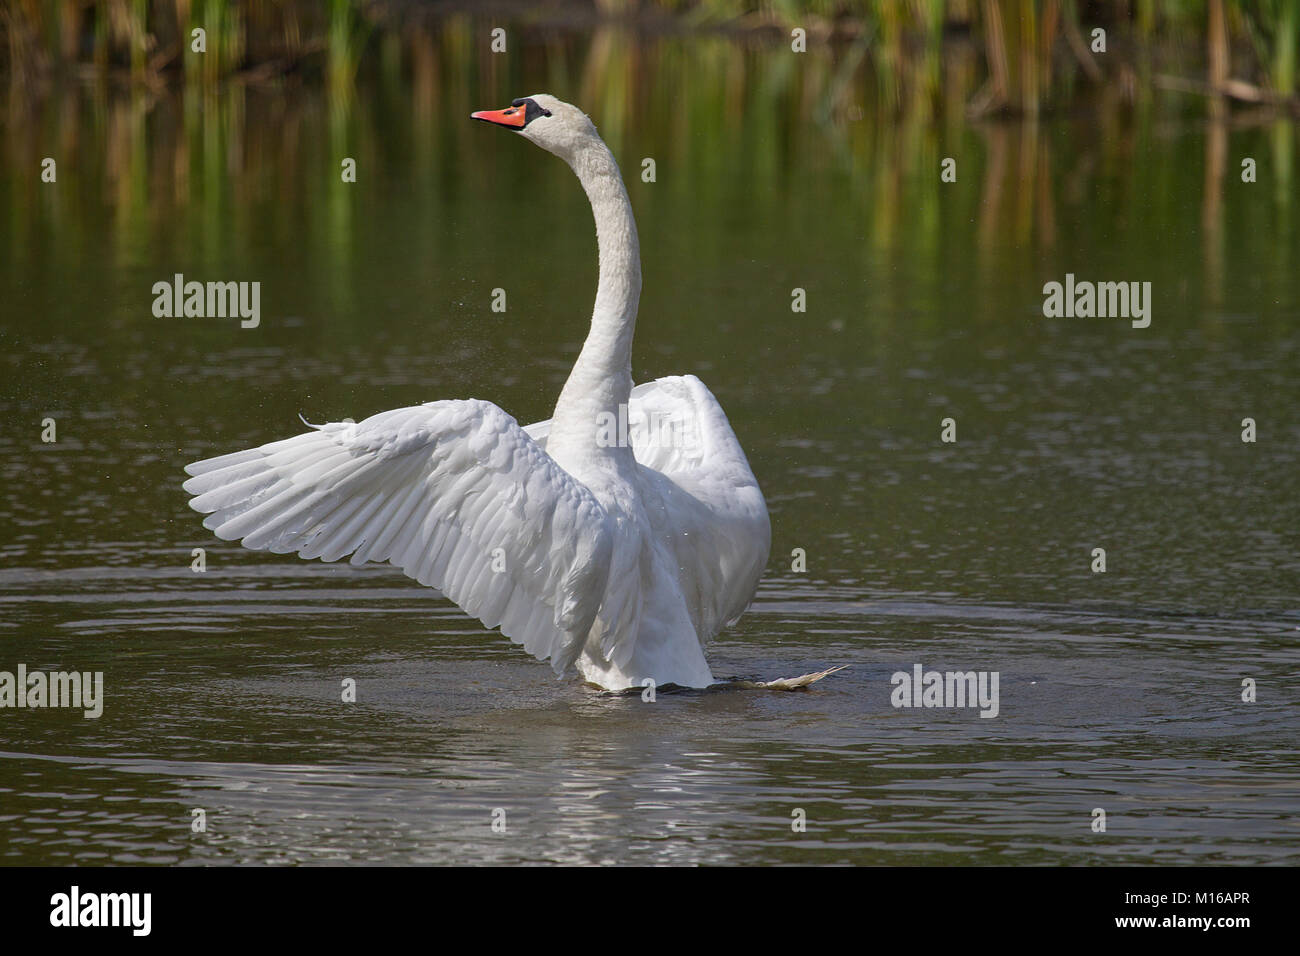 Mute swan (Cygnus olor) with spreading wings in the water, Germany Stock Photo